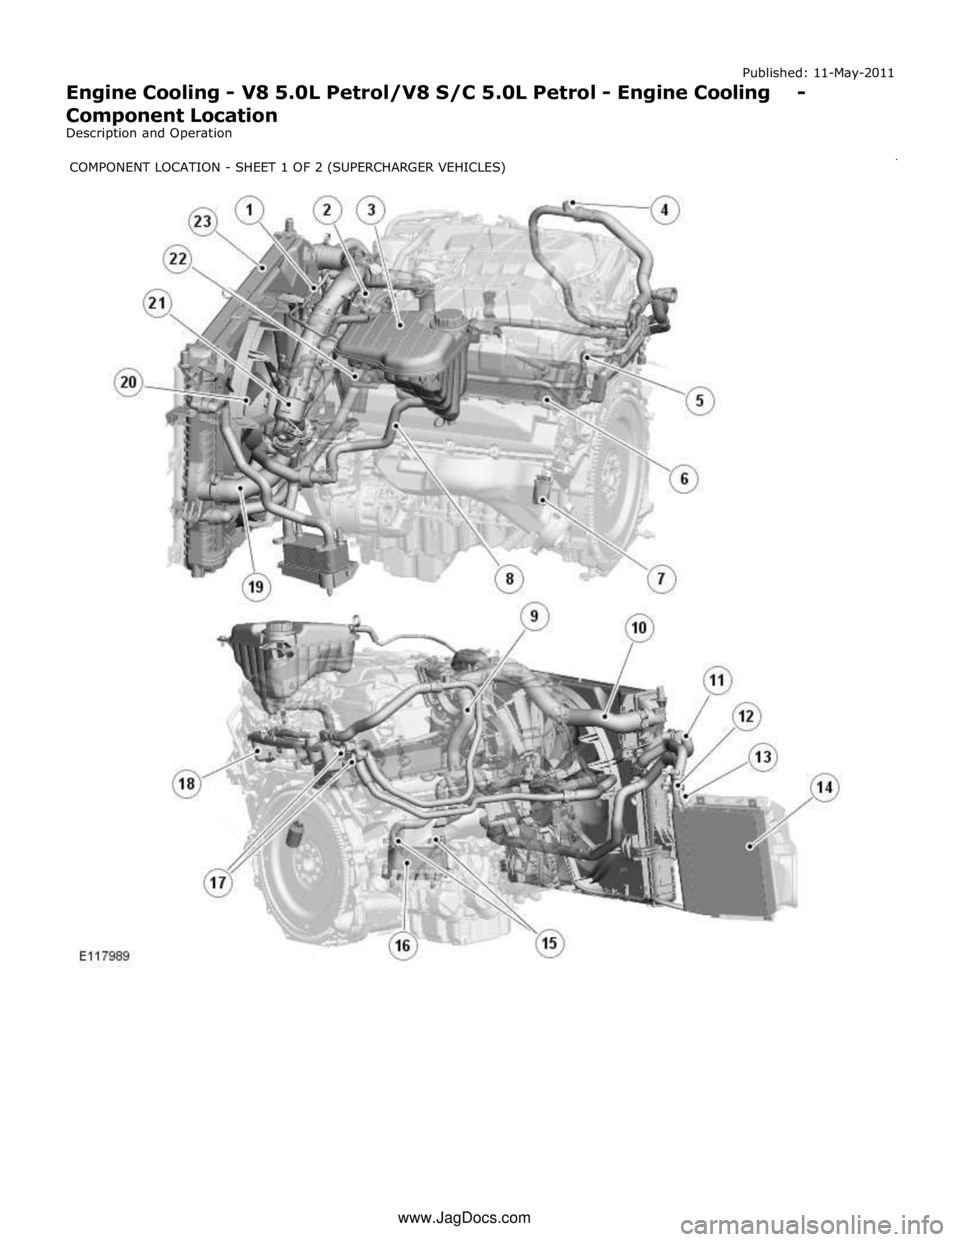 JAGUAR XFR 2010 1.G User Guide Published: 11-May-2011 
Engine Cooling - V8 5.0L Petrol/V8 S/C 5.0L Petrol - Engine Cooling - Component Location 
Description and Operation 
 
          
 
 
 
  
    
   
   
    
        
    
  
  